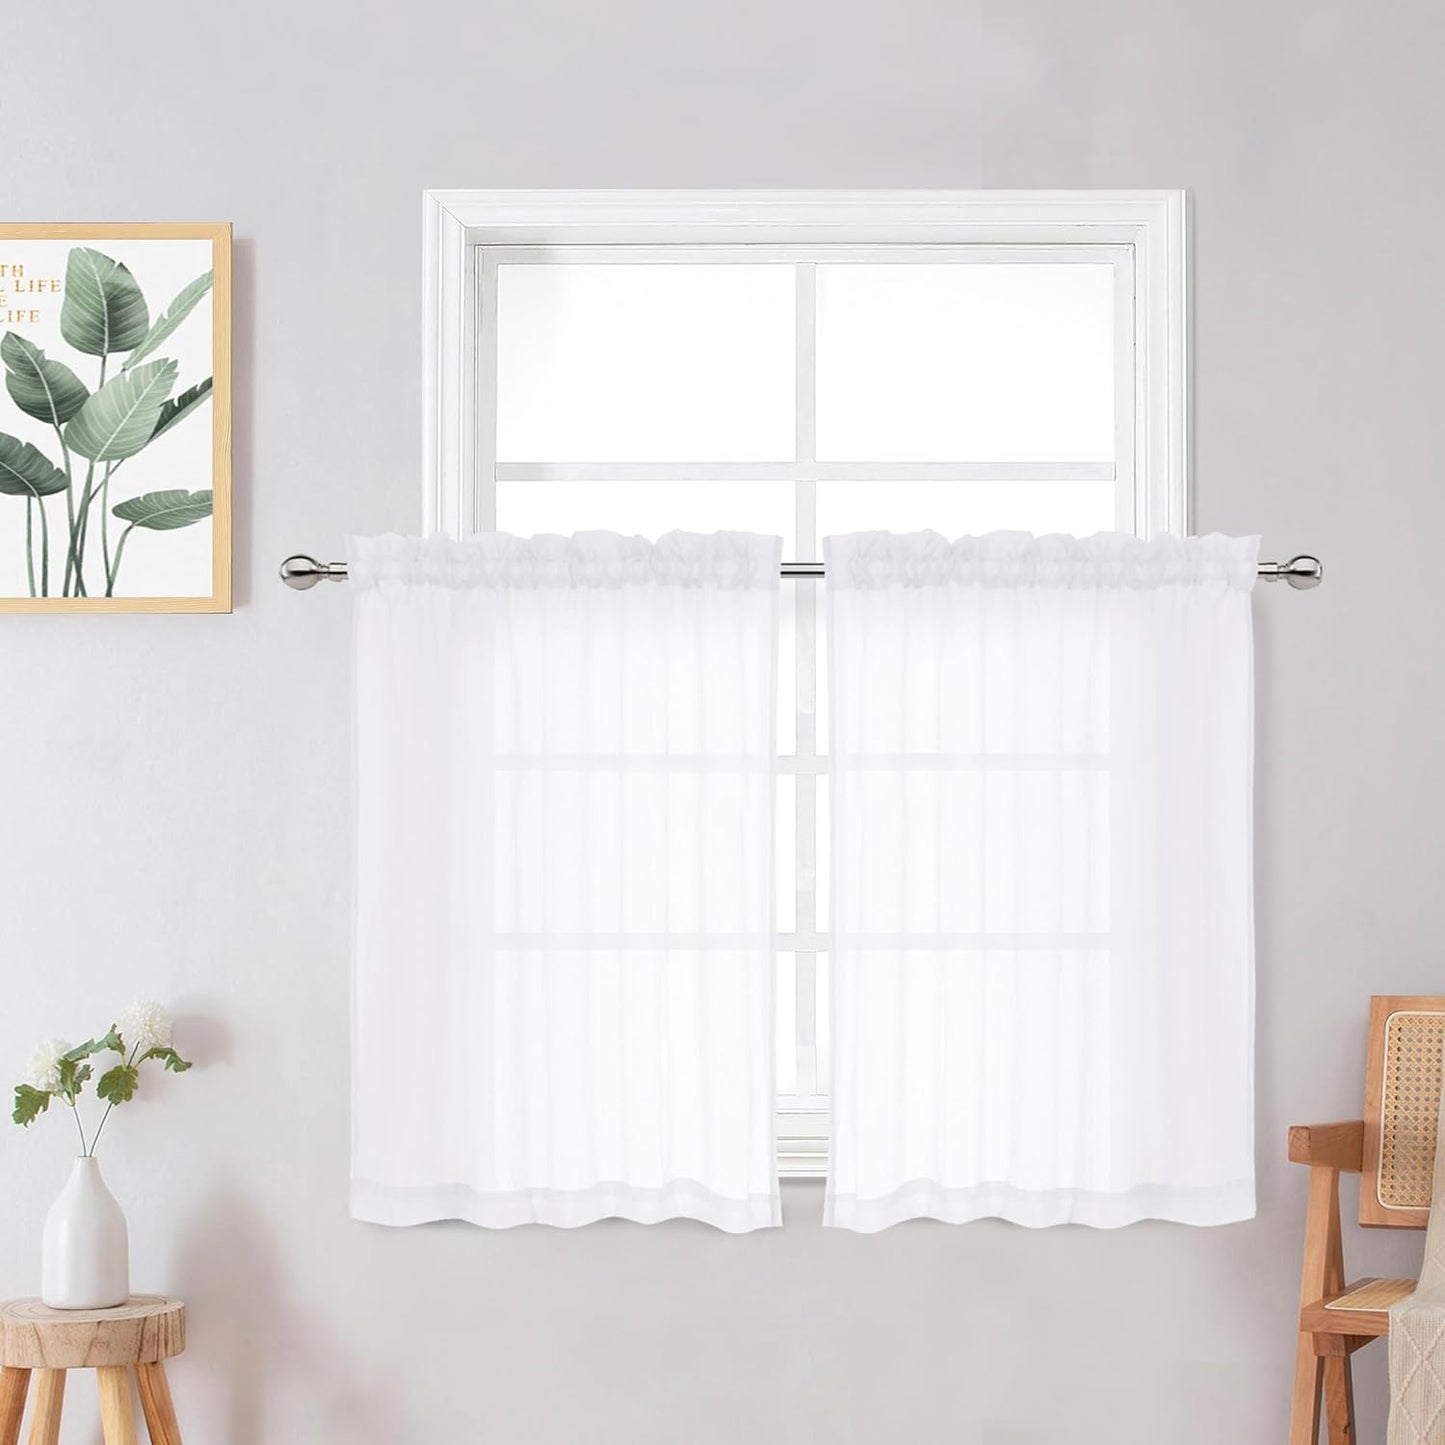 Chyhomenyc Crushed White Sheer Valances for Window 14 Inch Length 2 PCS, Crinkle Voile Short Kitchen Curtains with Dual Rod Pockets，Gauzy Bedroom Curtain Valance，Each 42Wx14L Inches  Chyhomenyc White 28 W X 24 L 